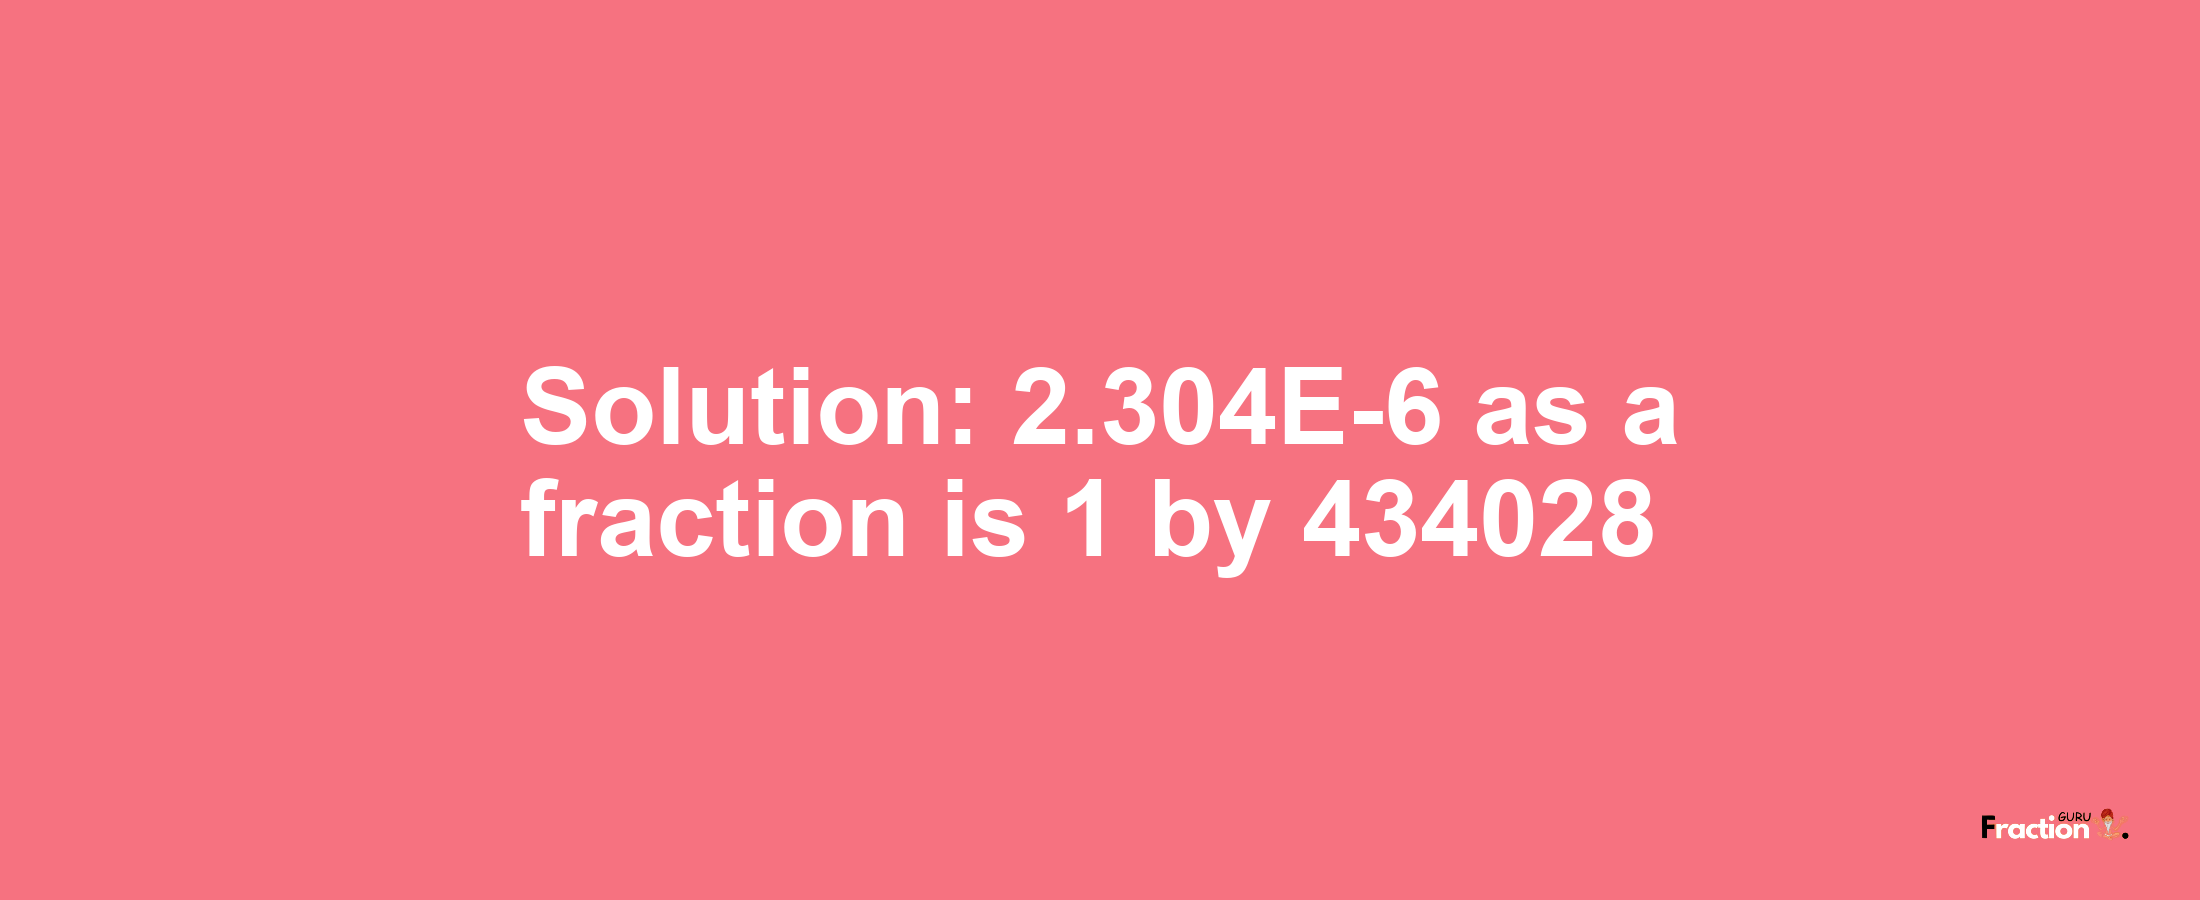 Solution:2.304E-6 as a fraction is 1/434028